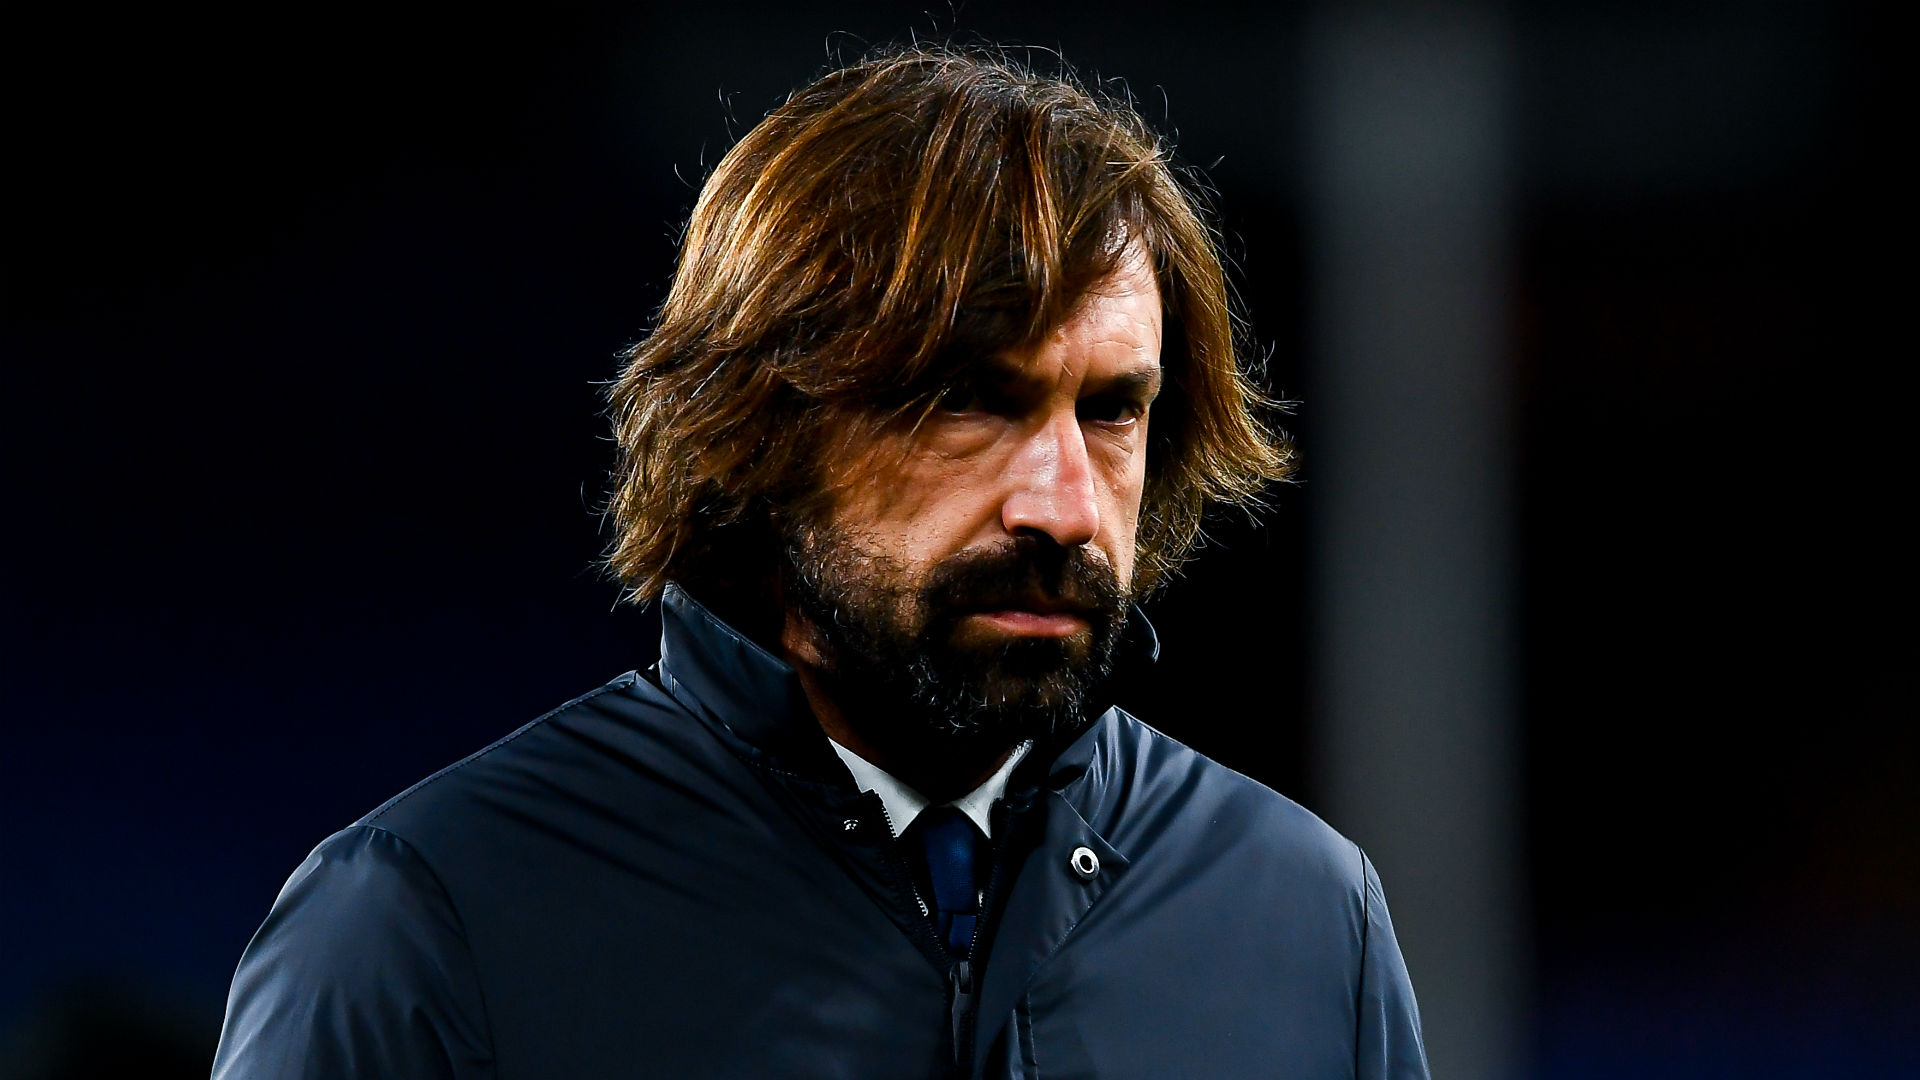 Juventus boss Pirlo slammed by Napoli chief De Laurentiis after appeal comment